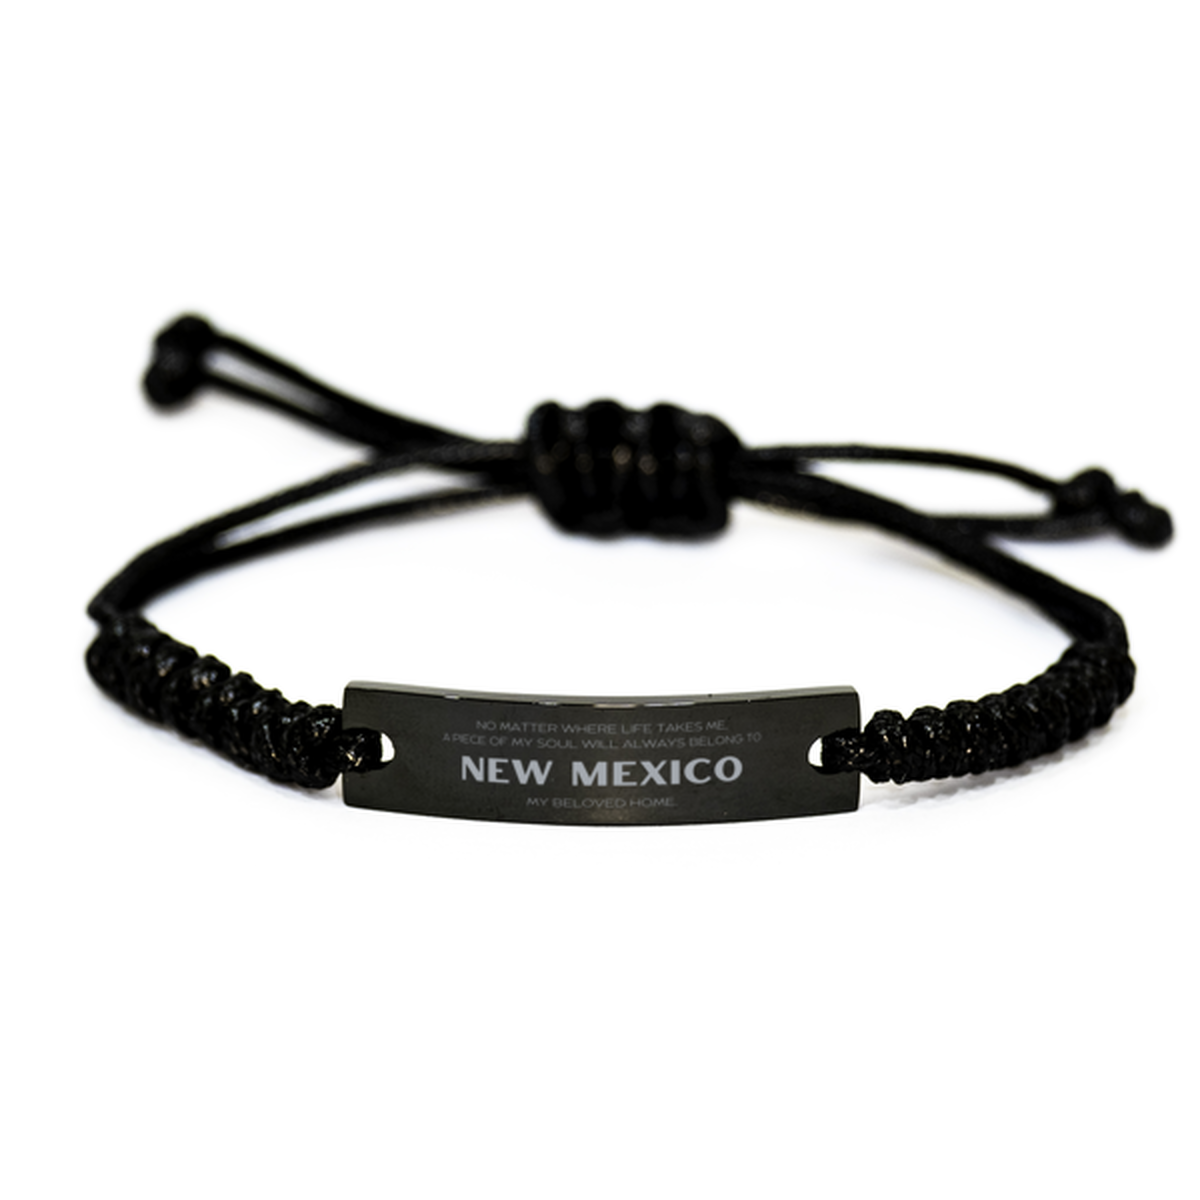 Love New Mexico State Gifts, My soul will always belong to New Mexico, Proud Black Rope Bracelet, Birthday Unique Gifts For New Mexico Men, Women, Friends